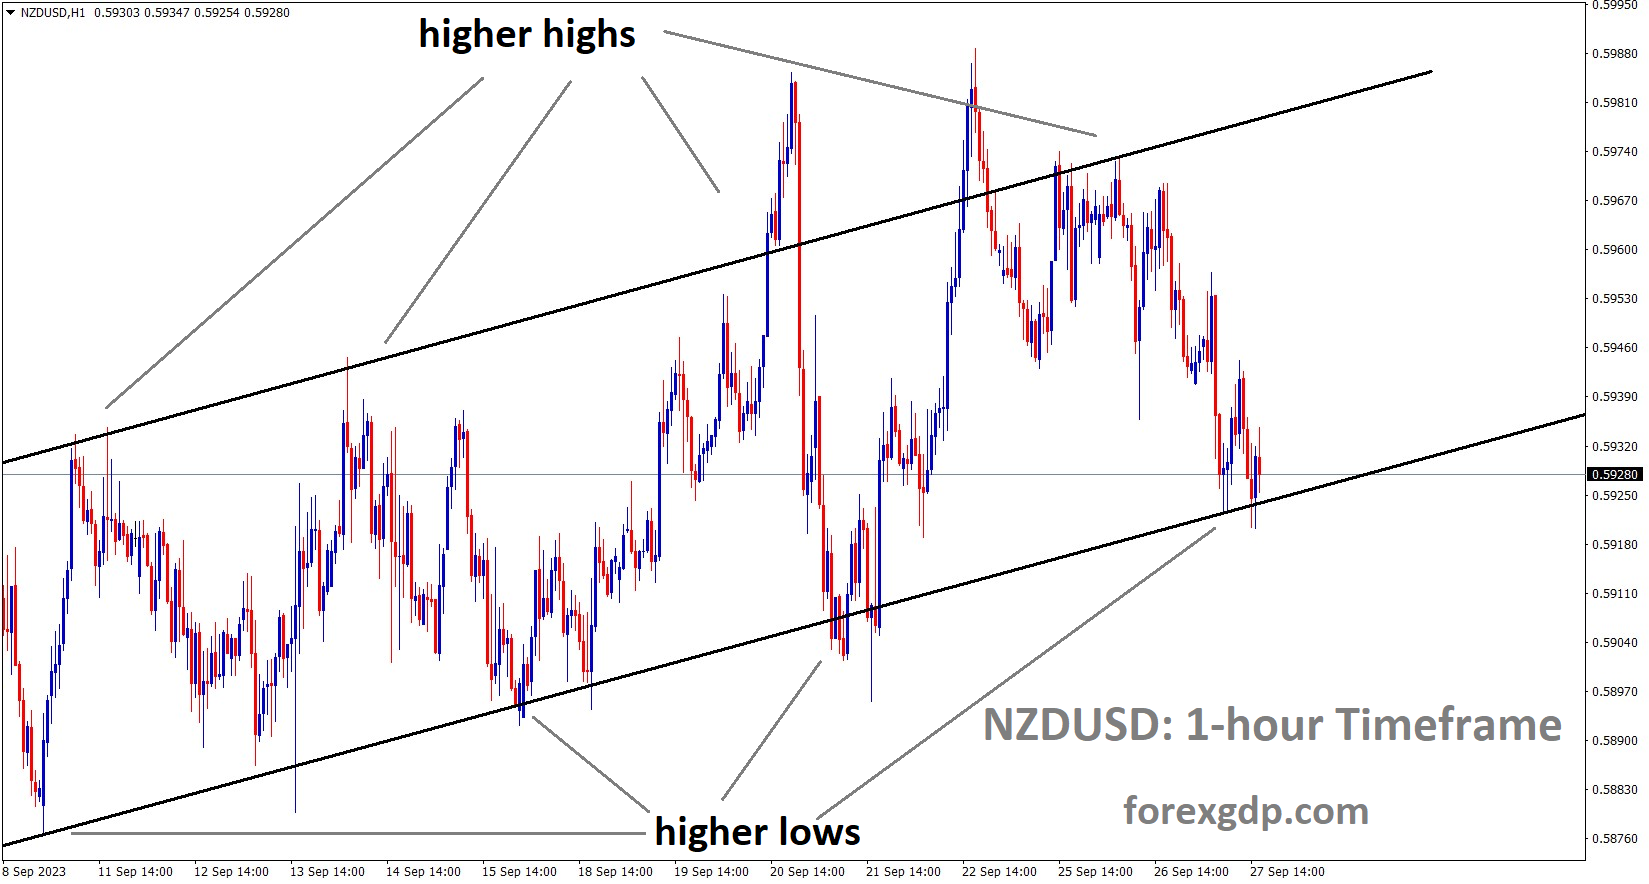 NZDUSD is moving in an Ascending channel and the market has reached the higher low area of the channel